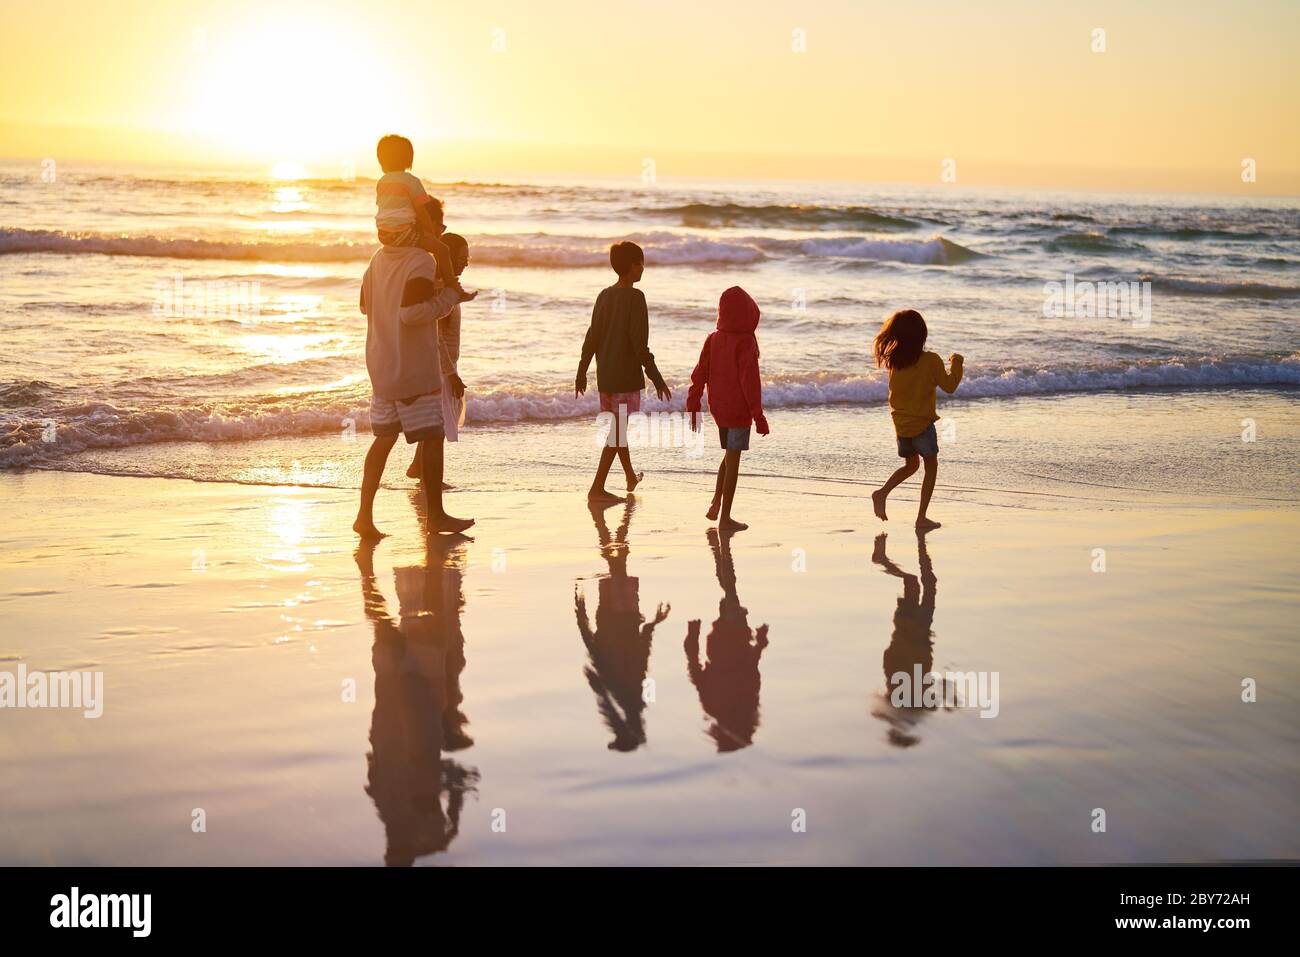 Family walking in ocean surf on beach at sunset Stock Photo